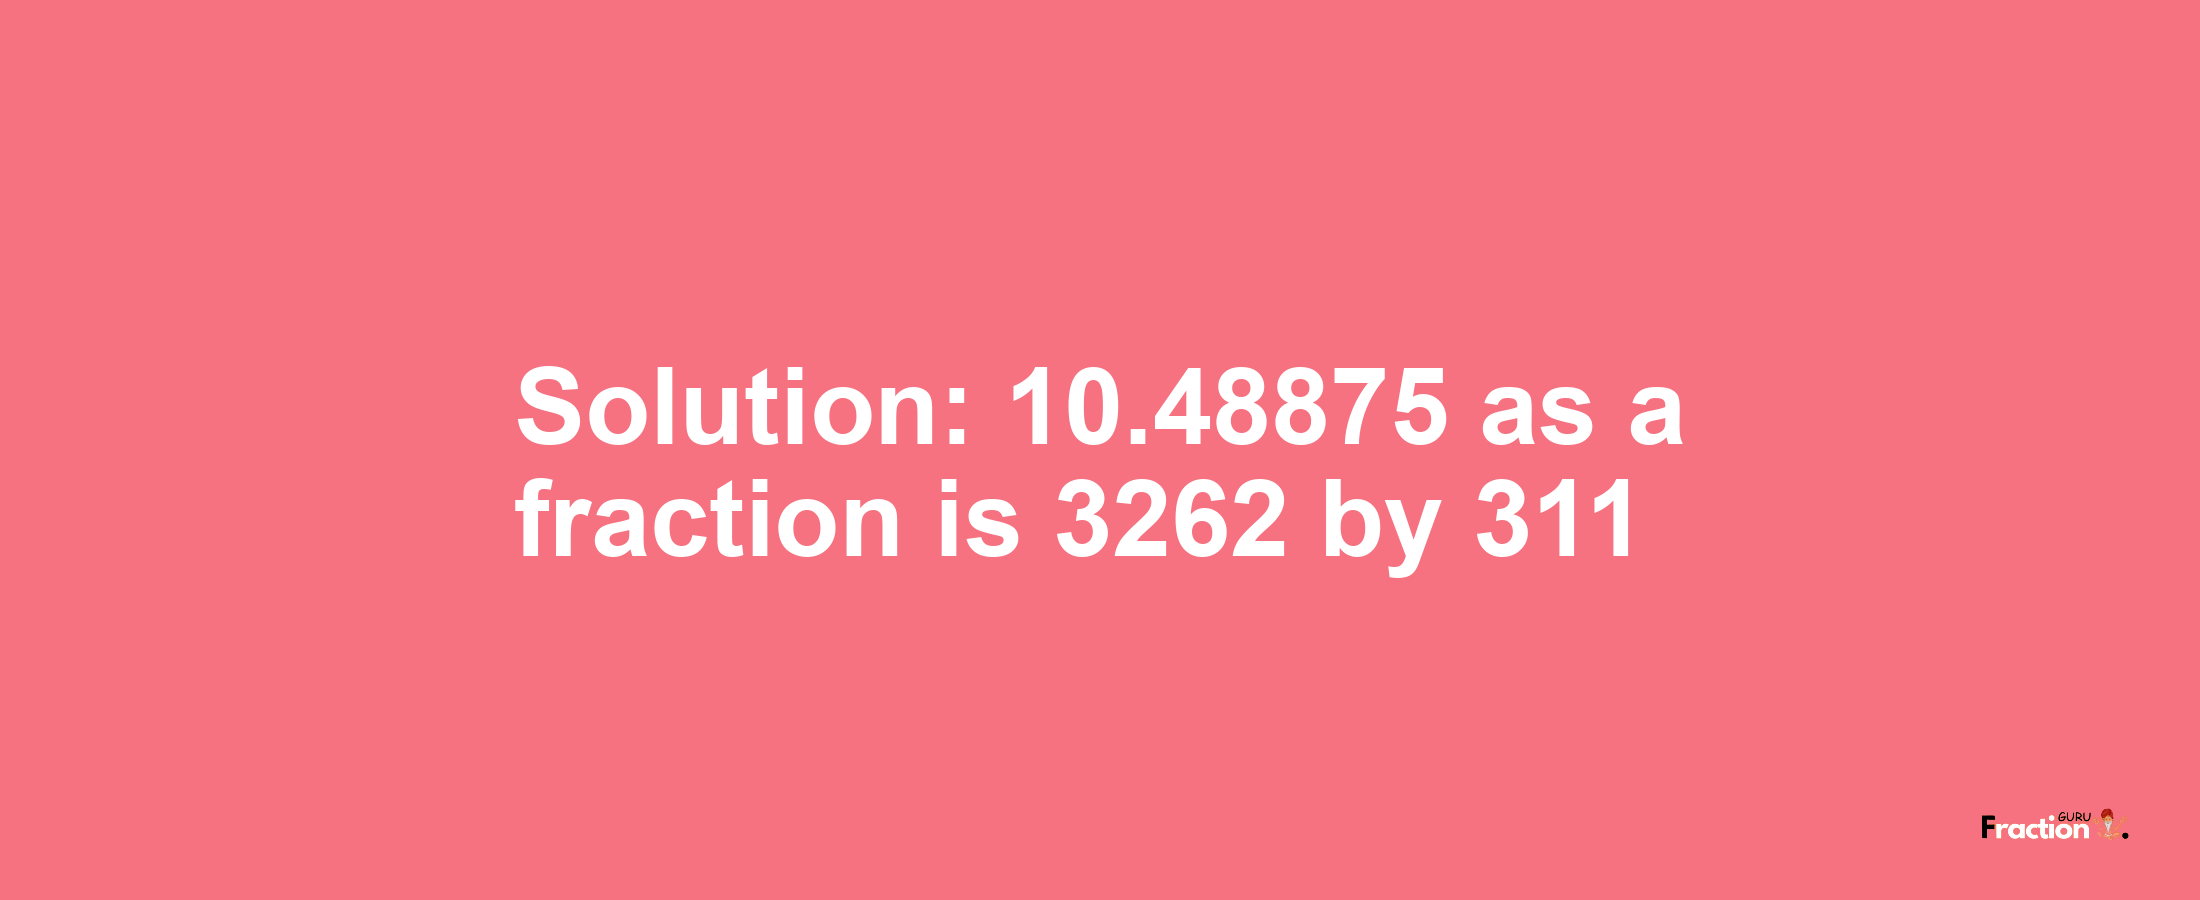 Solution:10.48875 as a fraction is 3262/311